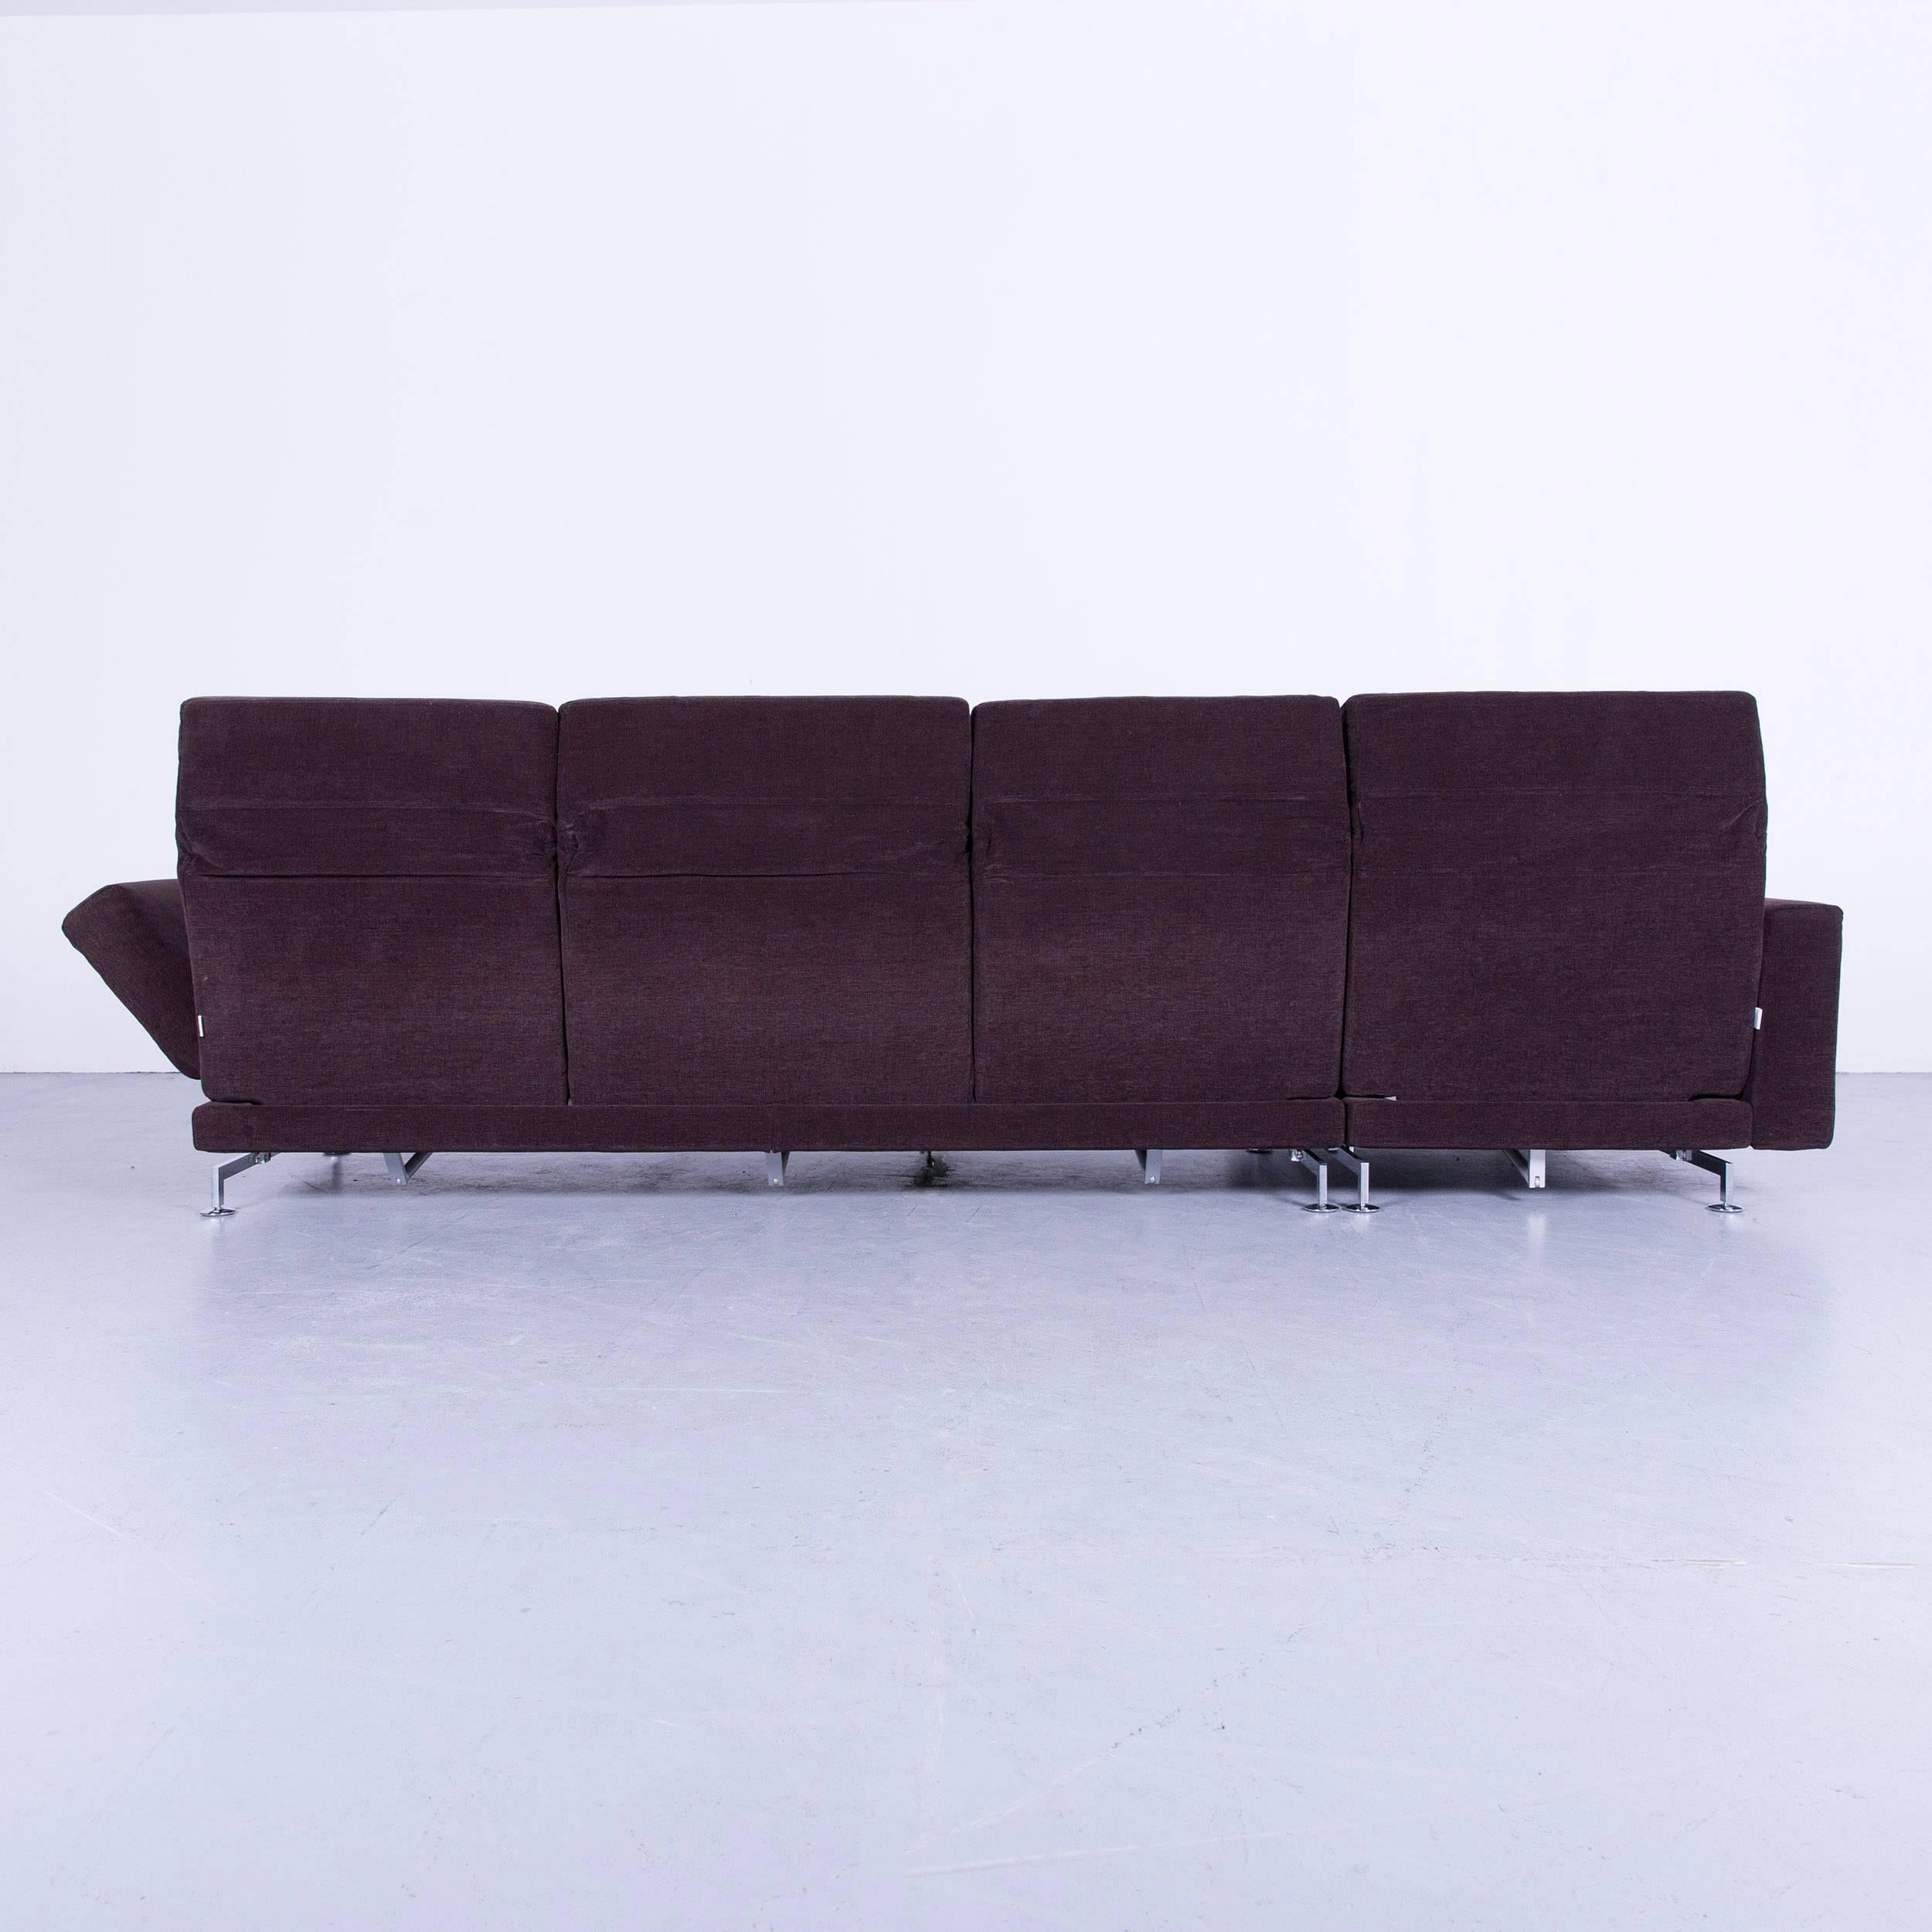 Brühl & Sippold Moule Designer Corner-Sofa Brown Couch Fabric 10